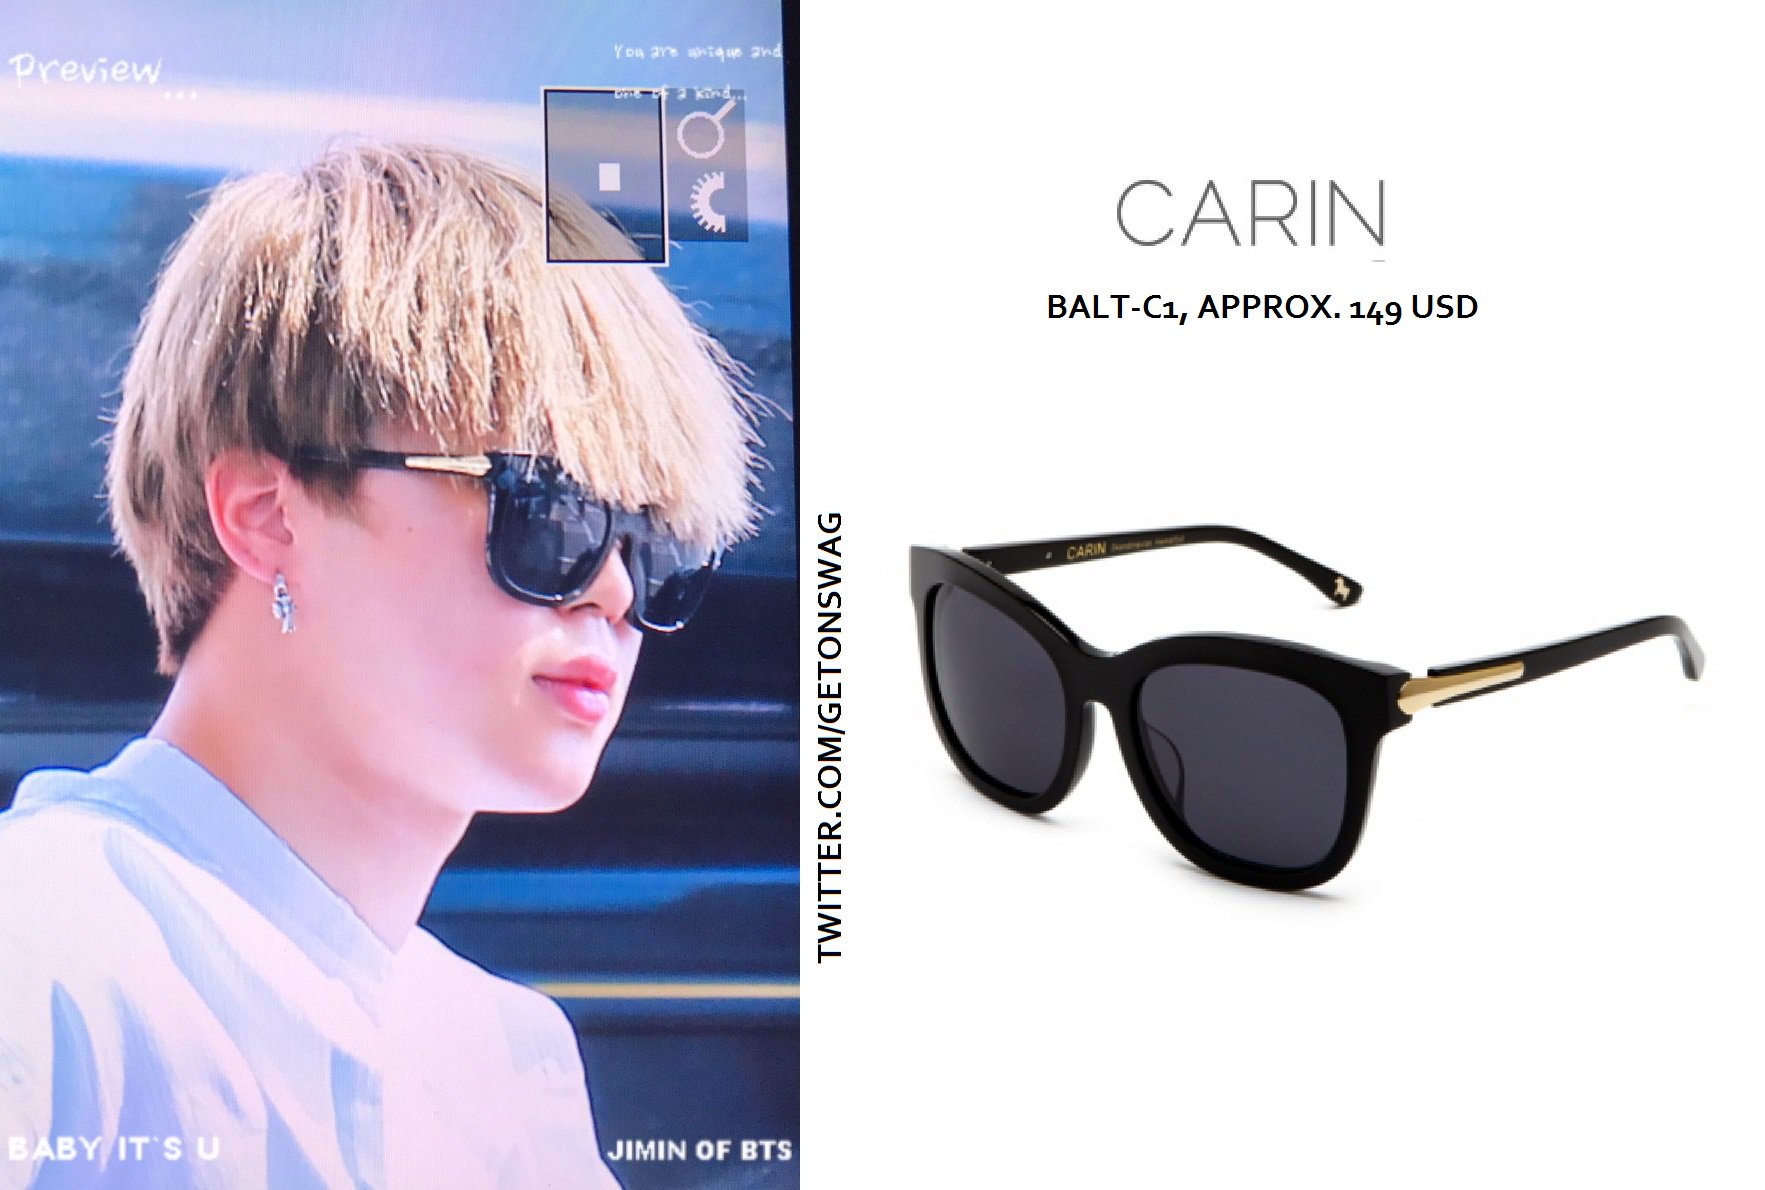 Beyond The Style ✼ Alex ✼ on X: JIMIN #BTS 160623 airport